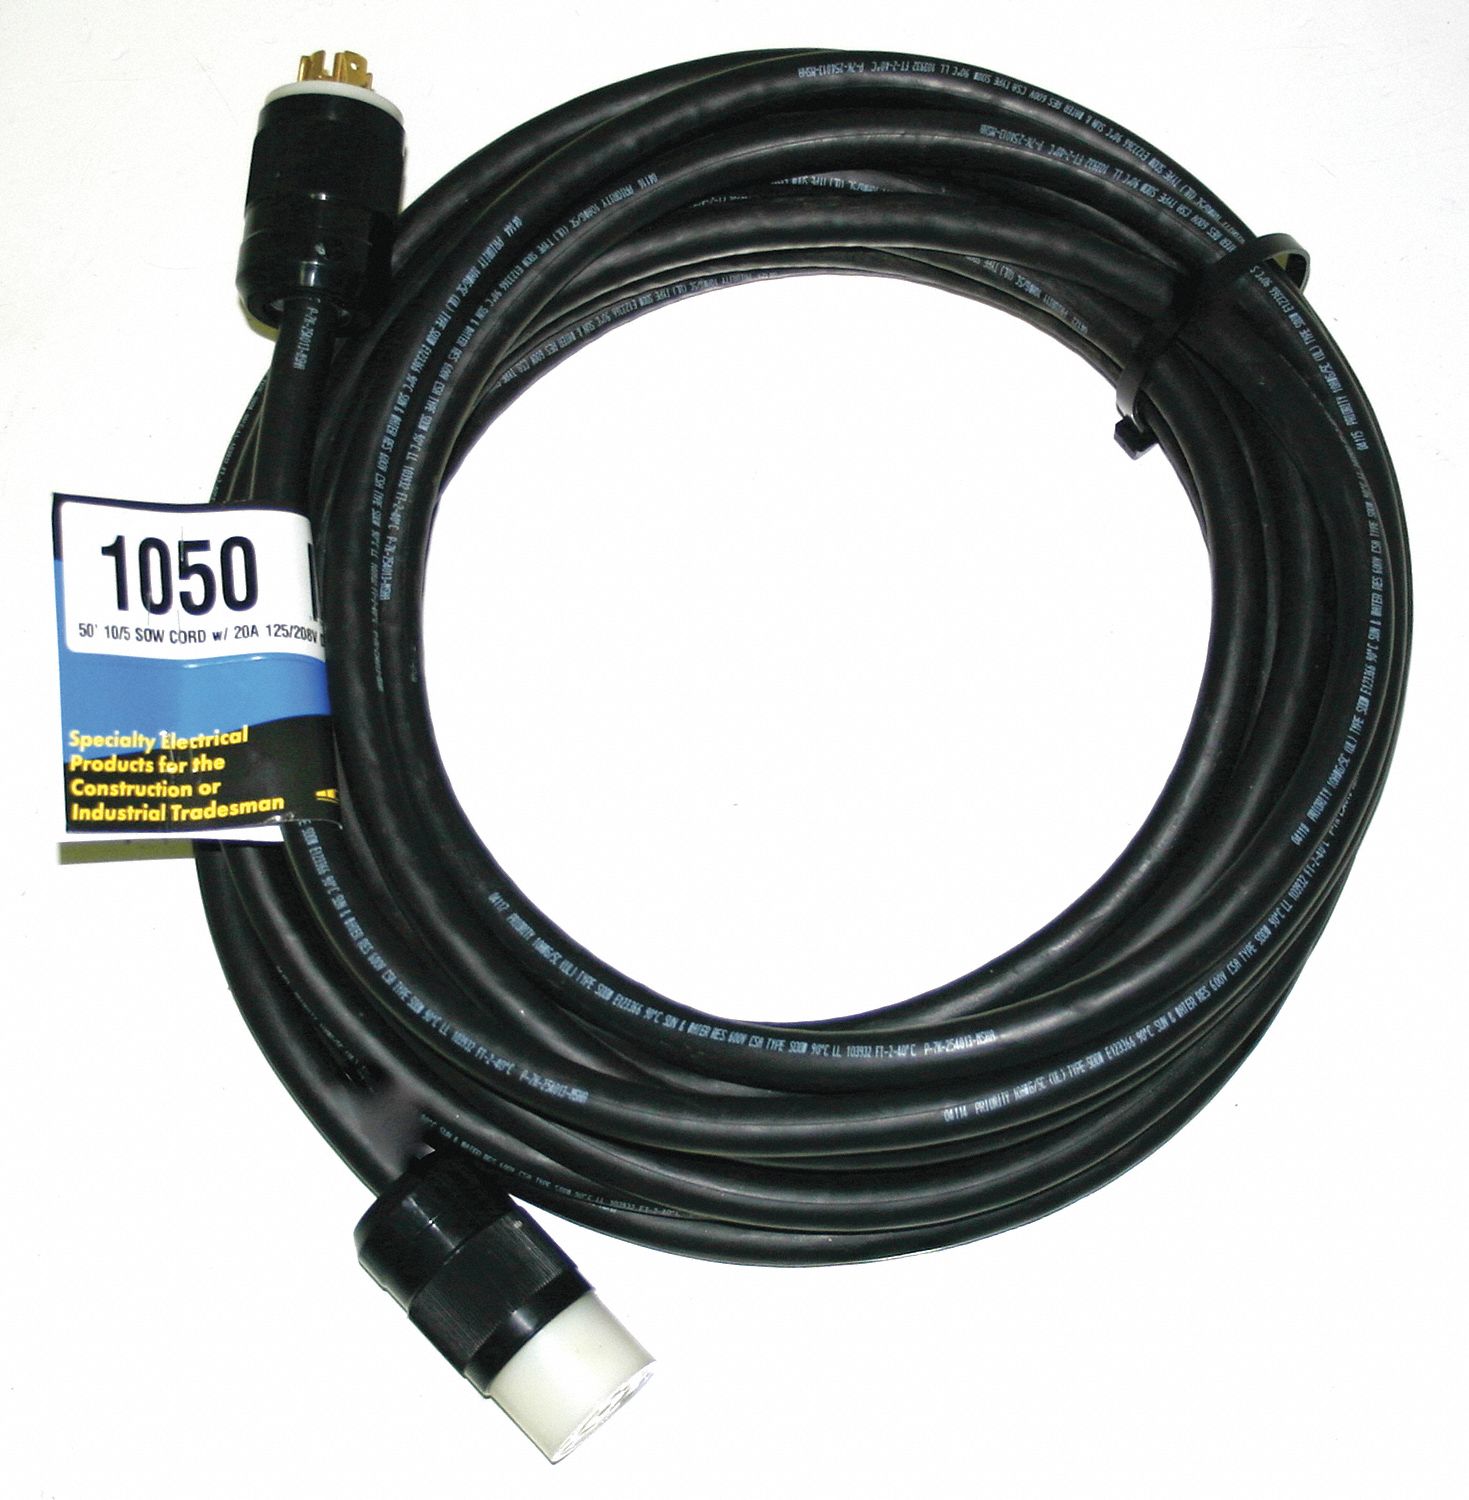 Indoor/Outdoor Extension Cord, 50 ft. Cord Length, 10/5 Gauge/Conductor, 30 Max. Amps